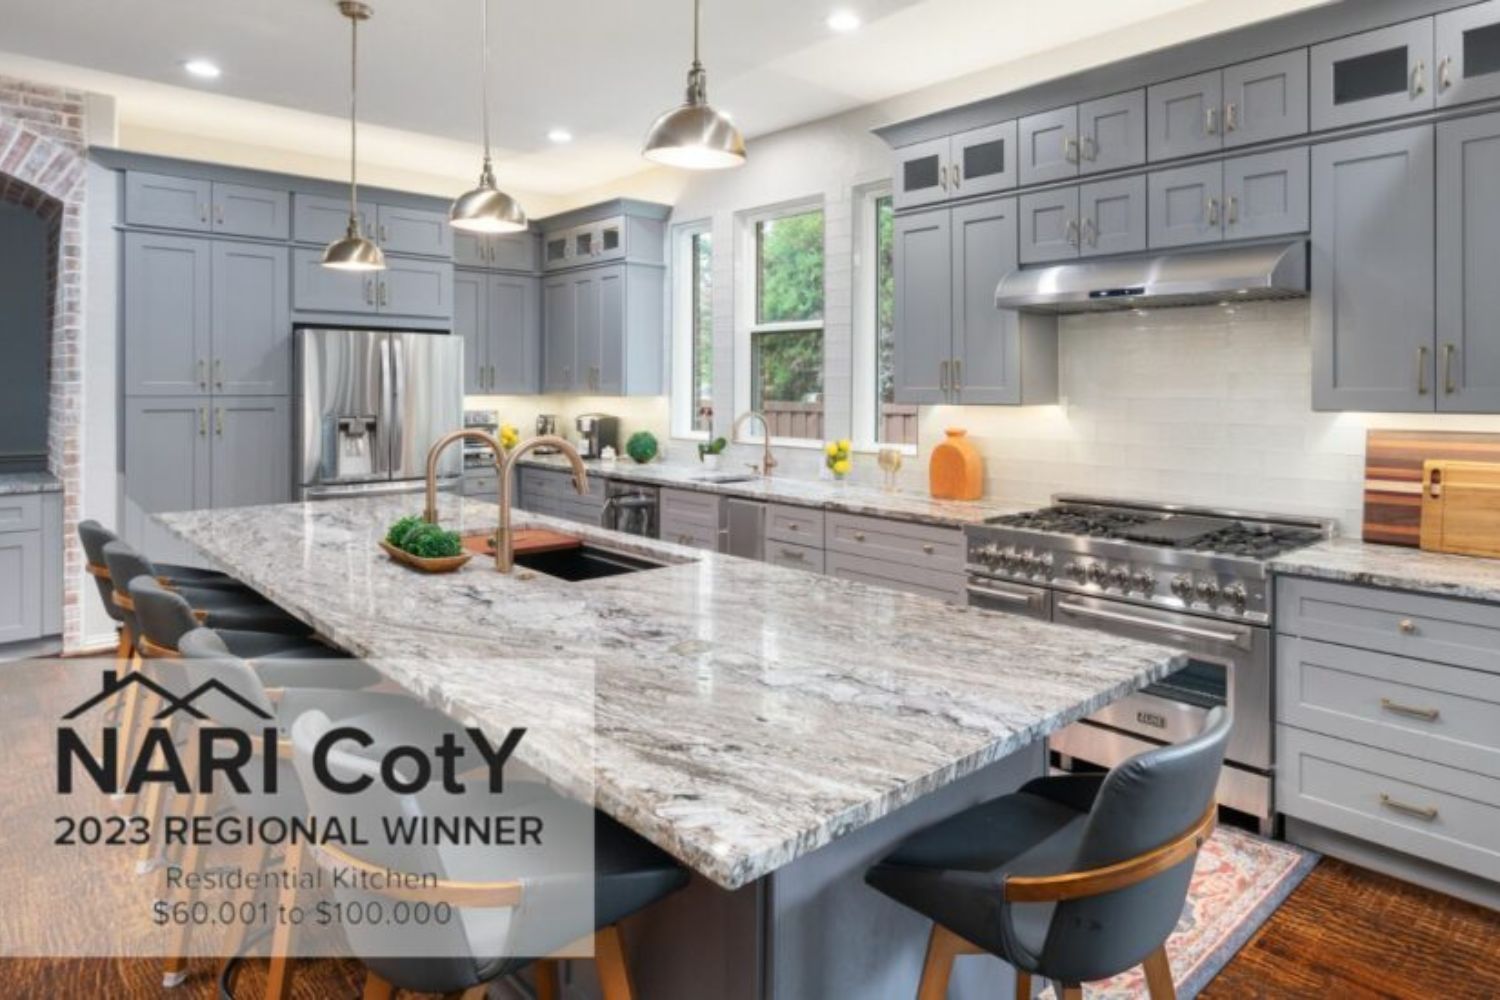 NATIONAL ASSOCIATION OF THE REMODELING INDUSTRY (NARI) 2023 REGIONAL AND NATIONAL COTY AWARD WINNER